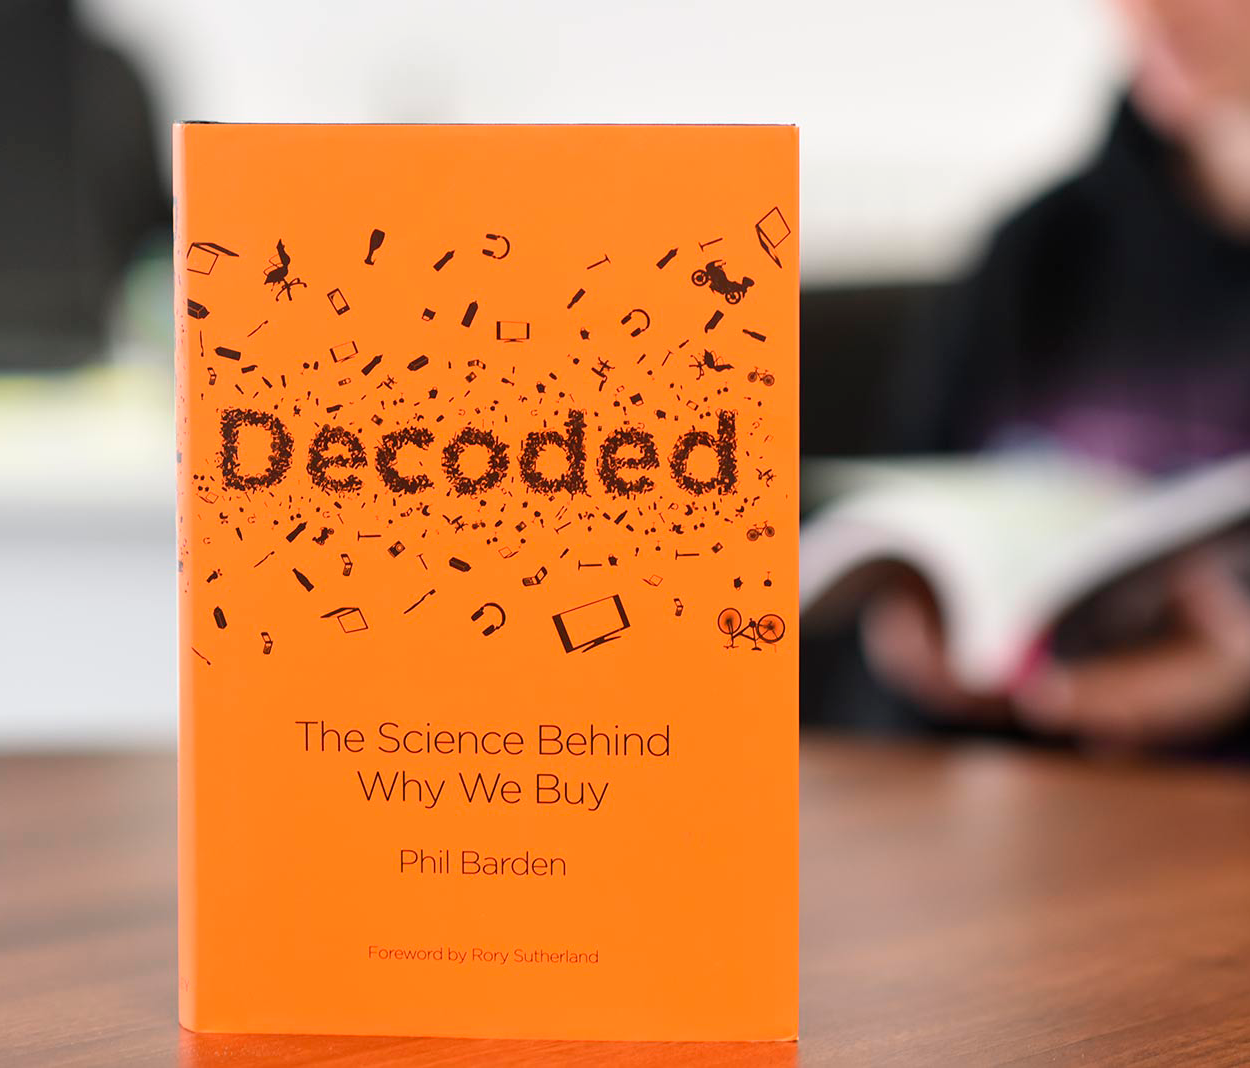 We bought new books. Фил Барден. "Decoded: the Science behind why we buy" Phil Barden. *Decoded* by Phil Barden..